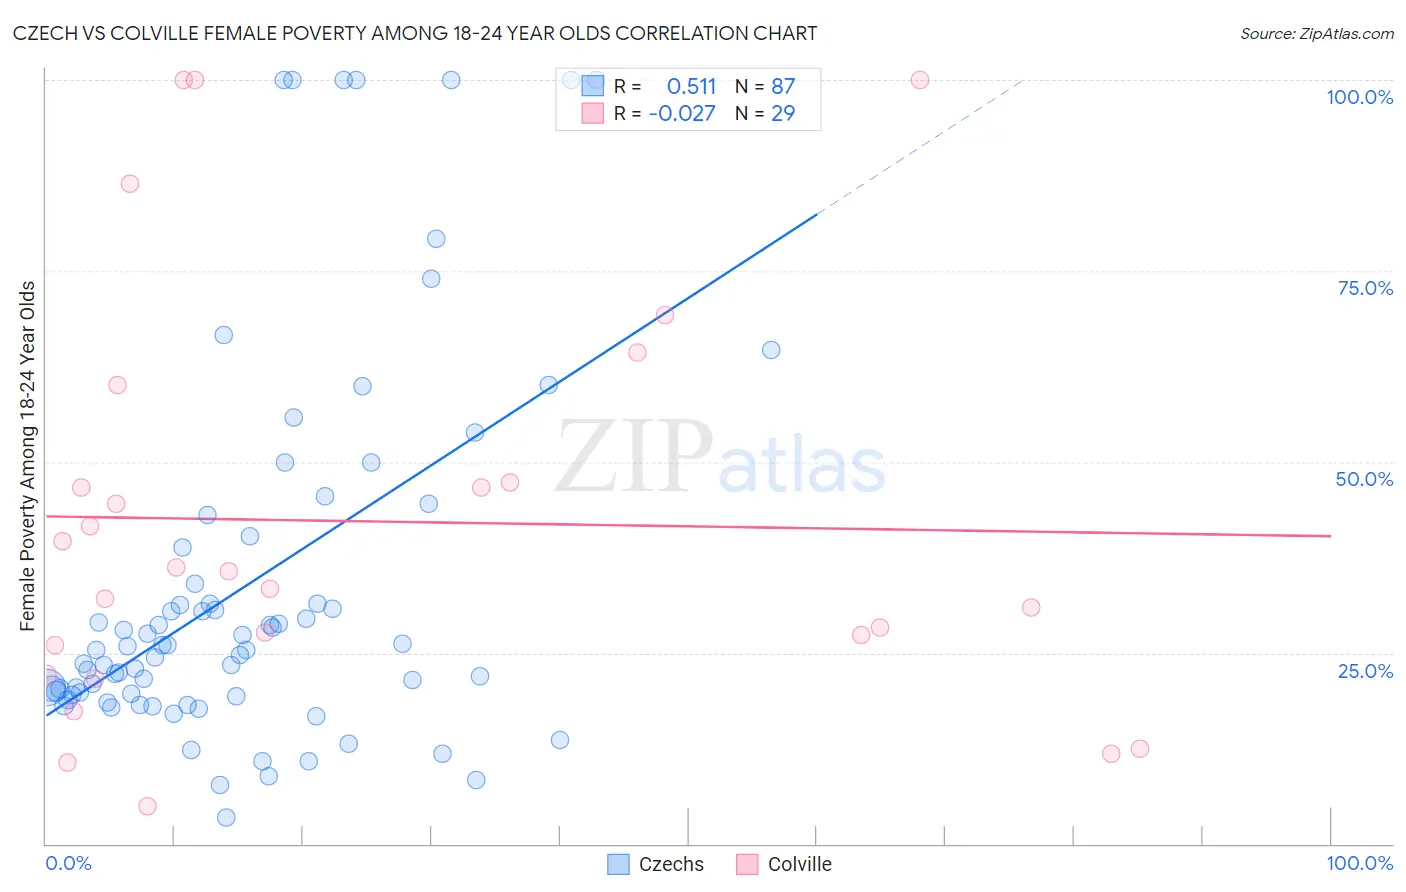 Czech vs Colville Female Poverty Among 18-24 Year Olds